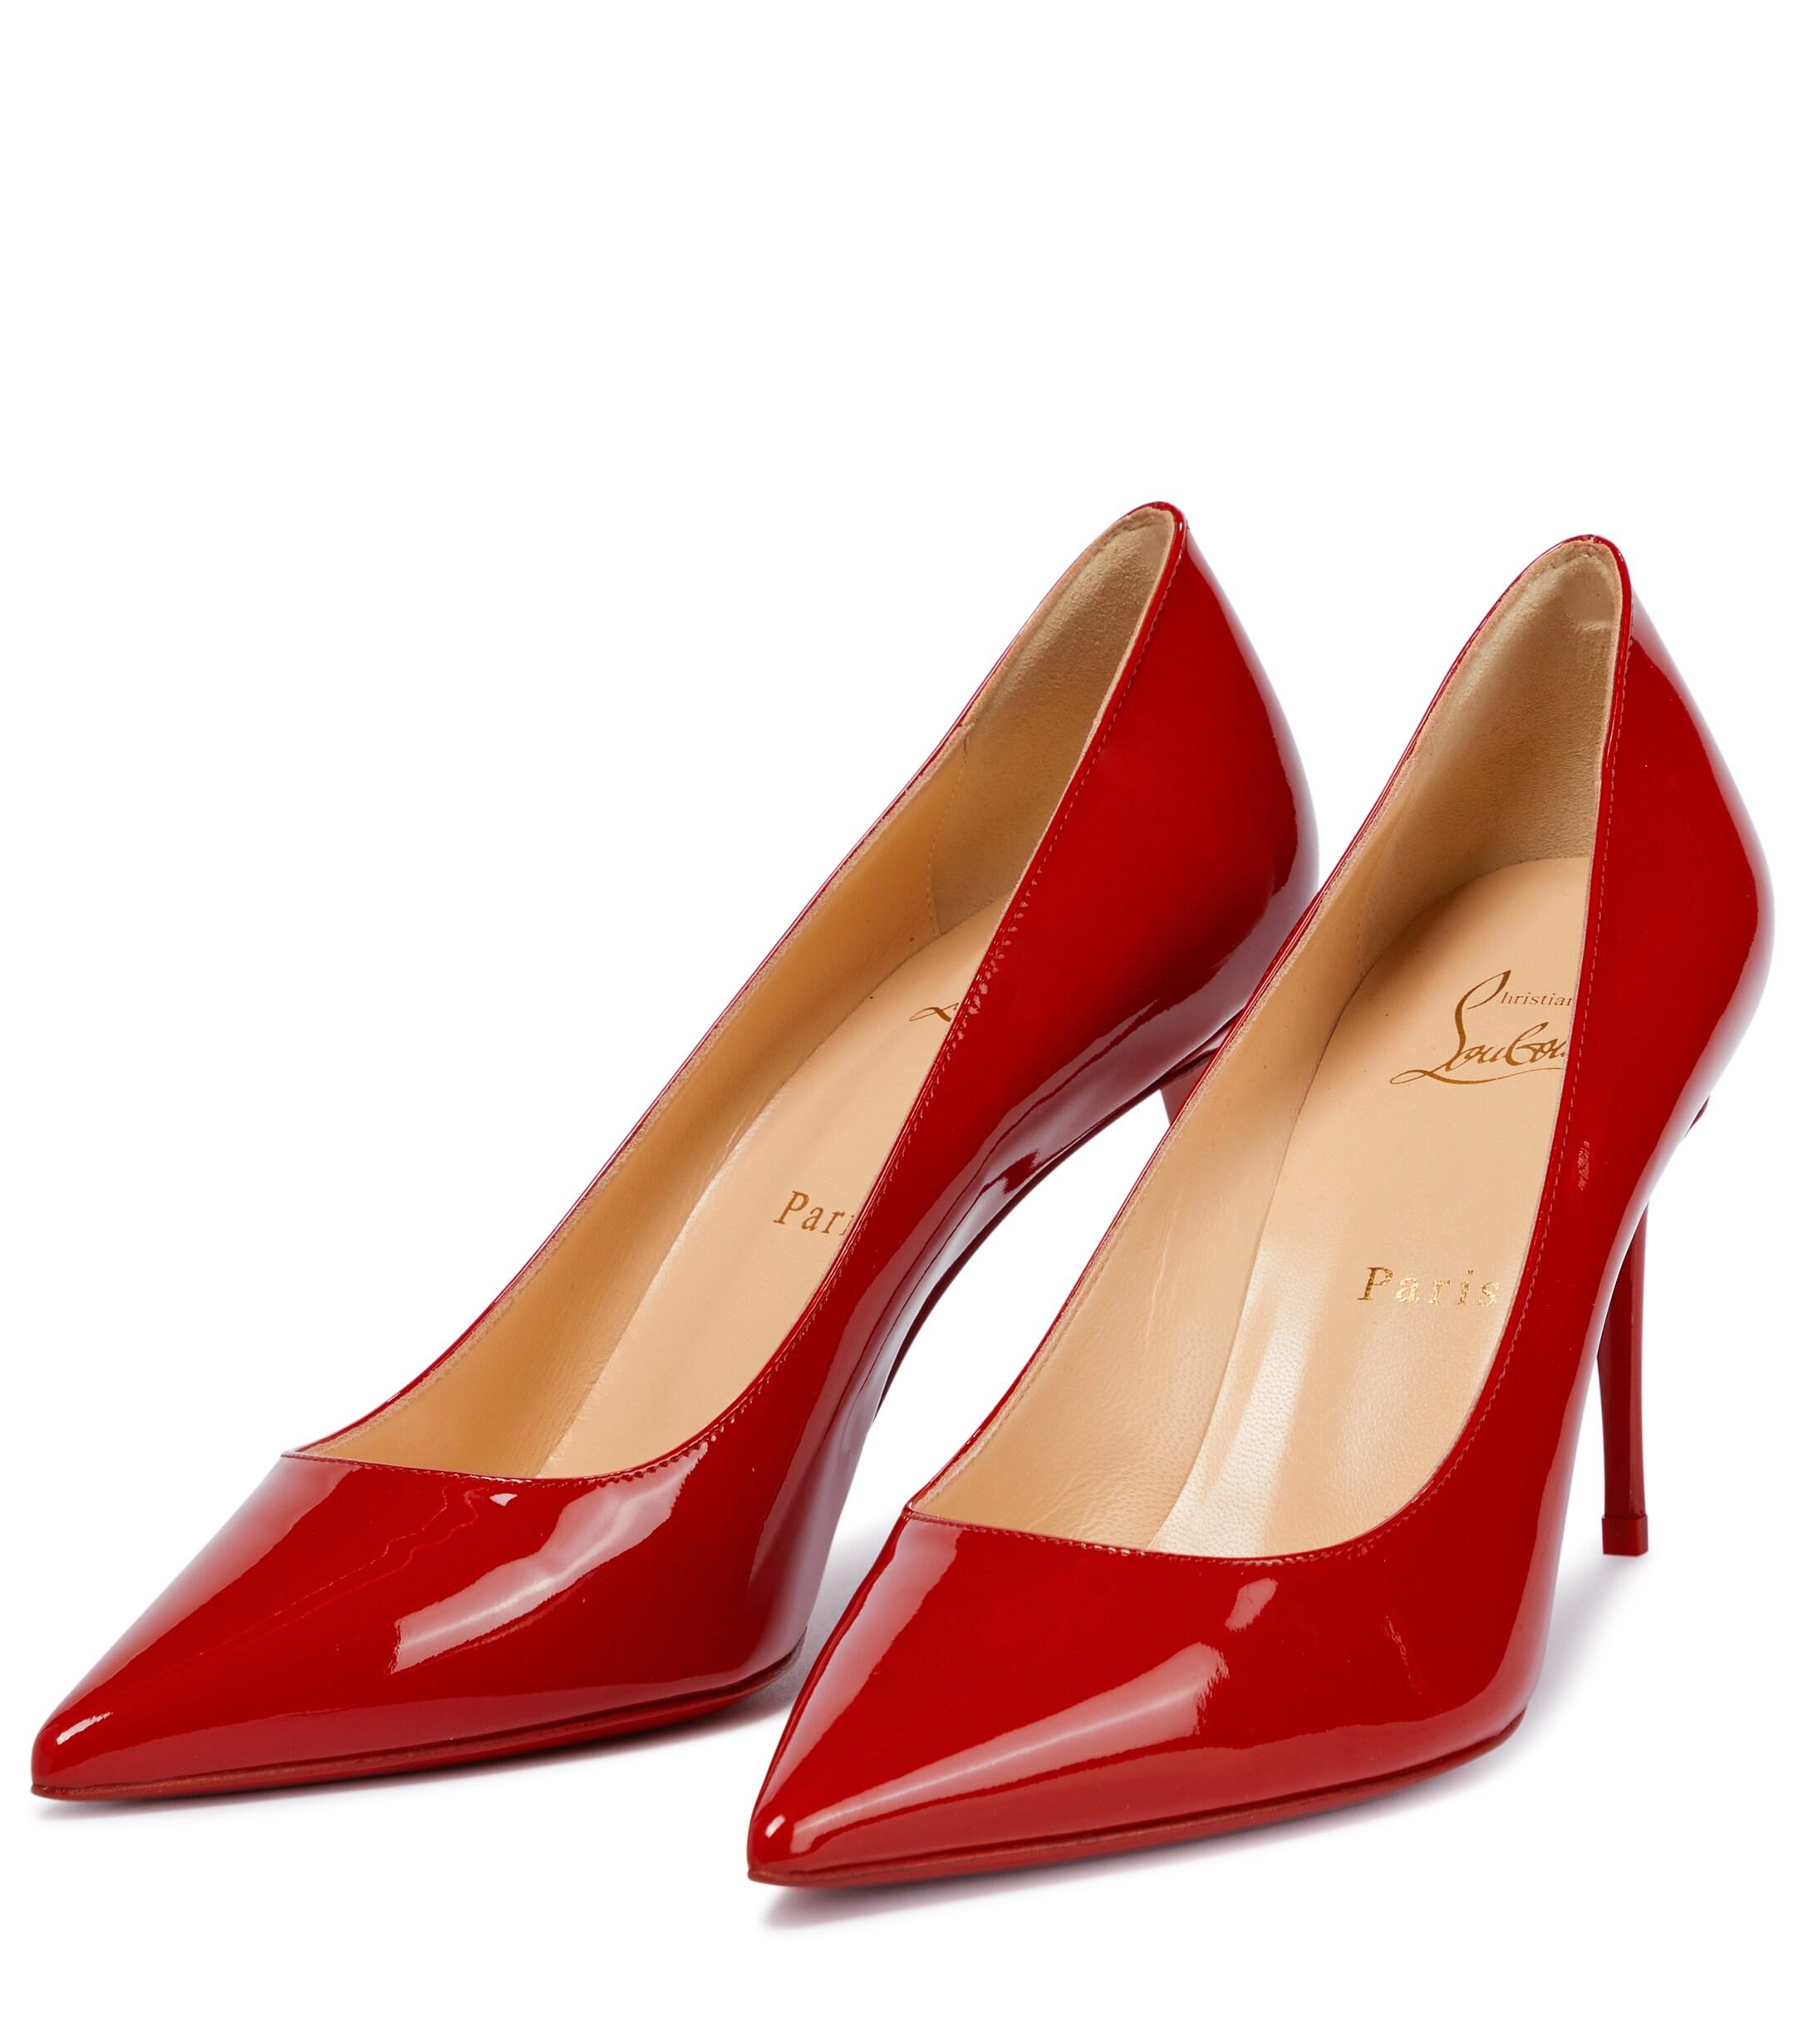 Christian Louboutin Kate 85 Patent Leather Pumps in Red | Lyst